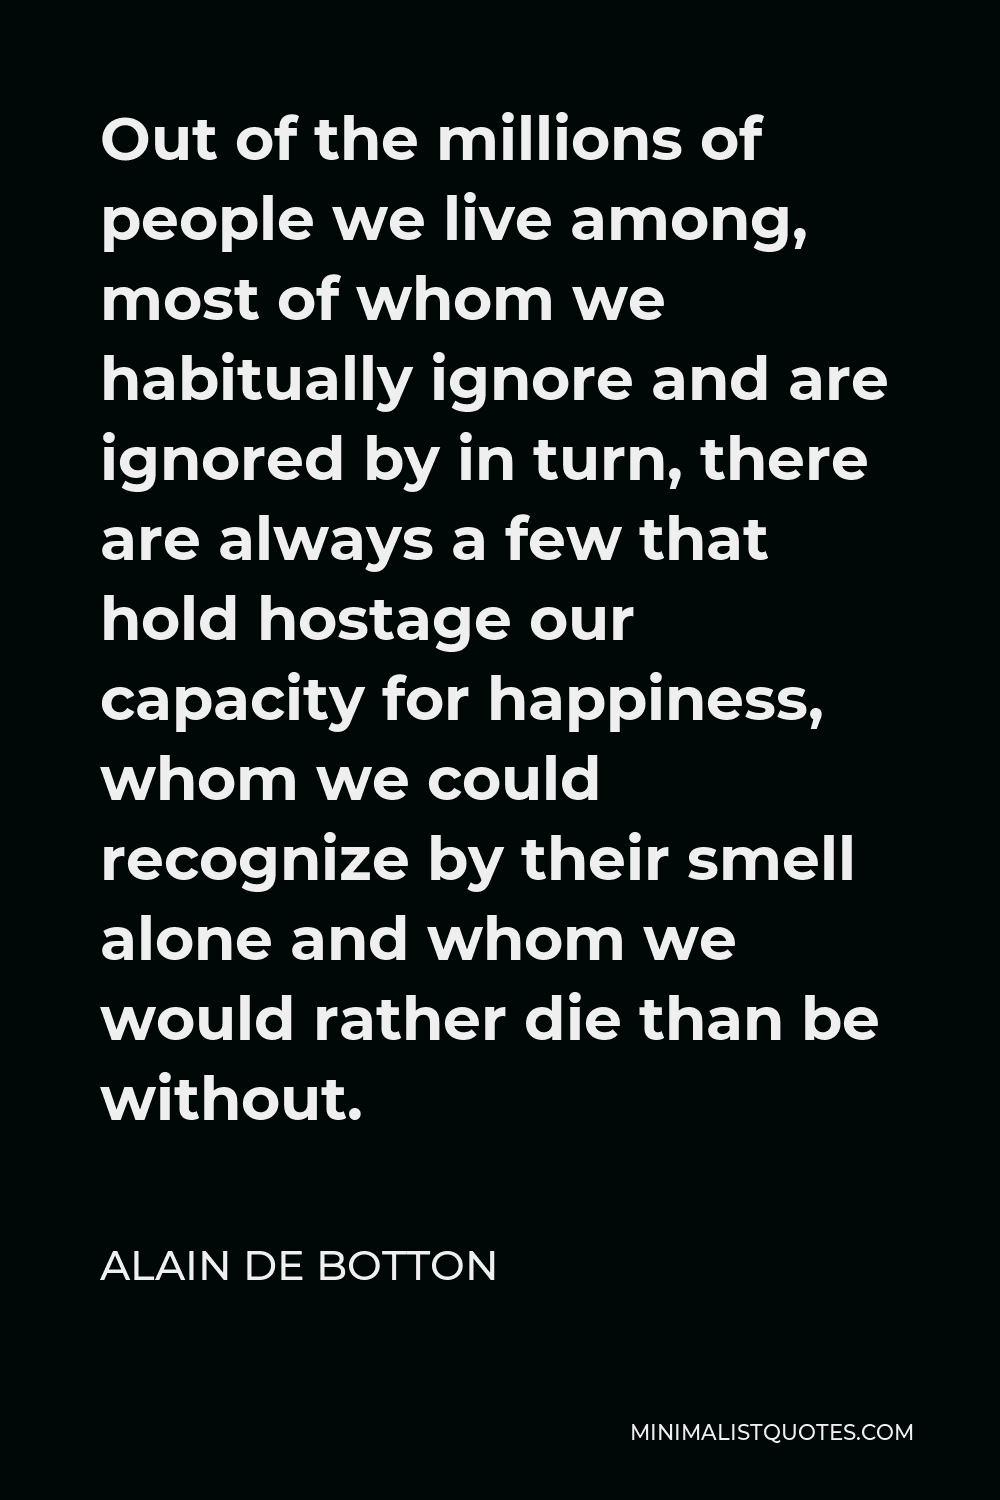 Alain de Botton Quote - Out of the millions of people we live among, most of whom we habitually ignore and are ignored by in turn, there are always a few that hold hostage our capacity for happiness, whom we could recognize by their smell alone and whom we would rather die than be without.